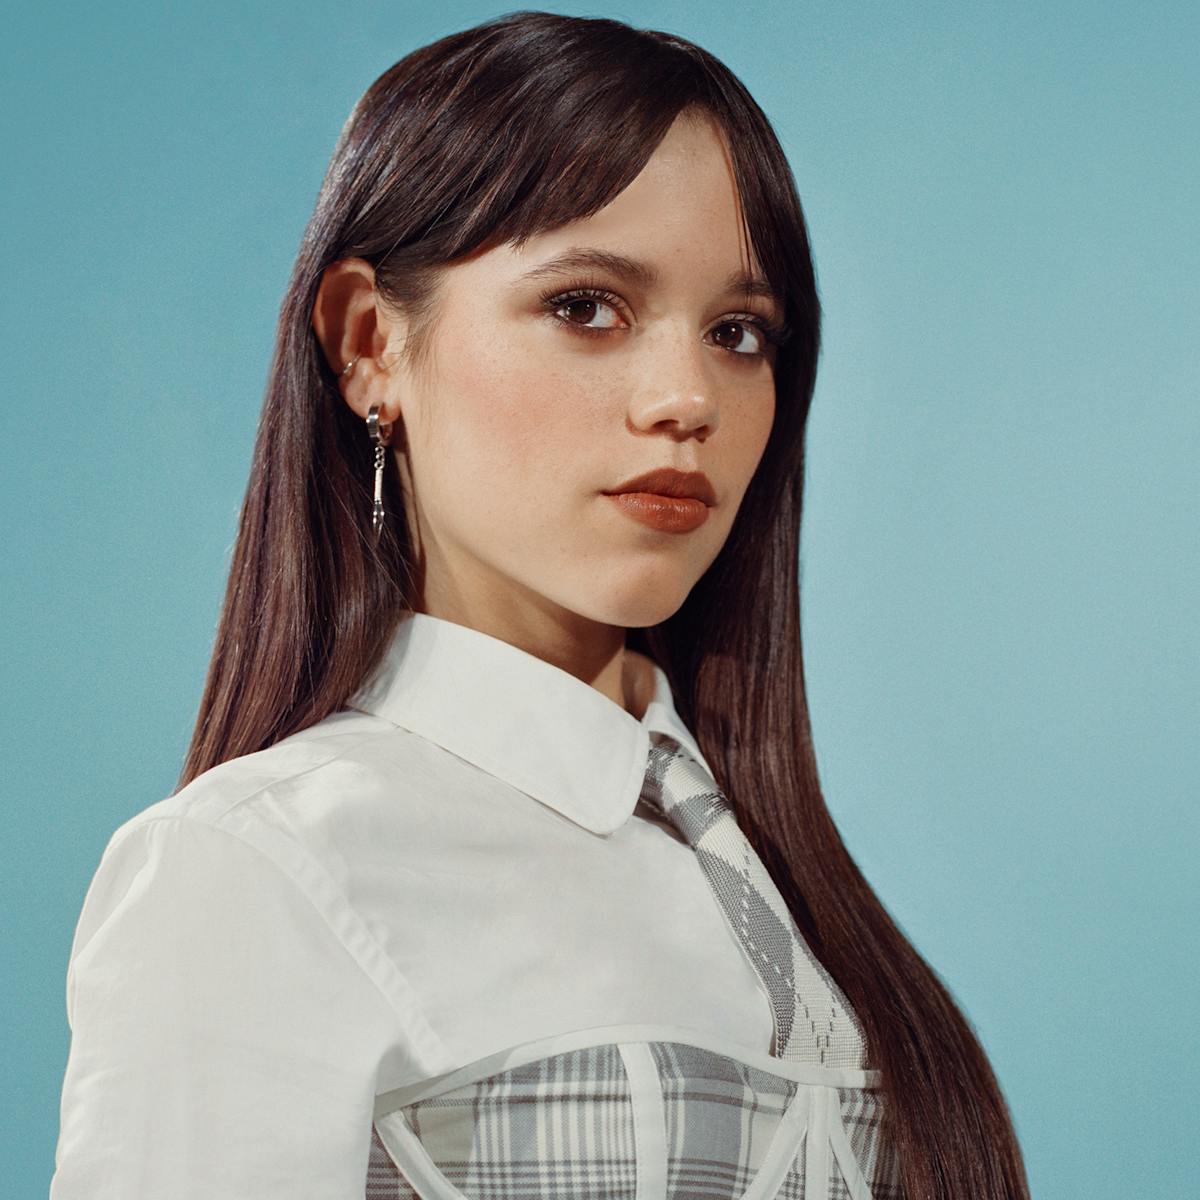 Jenna Ortega wears a white shirt with a gray-and-white plaid dress over it. She stands against a teal background.